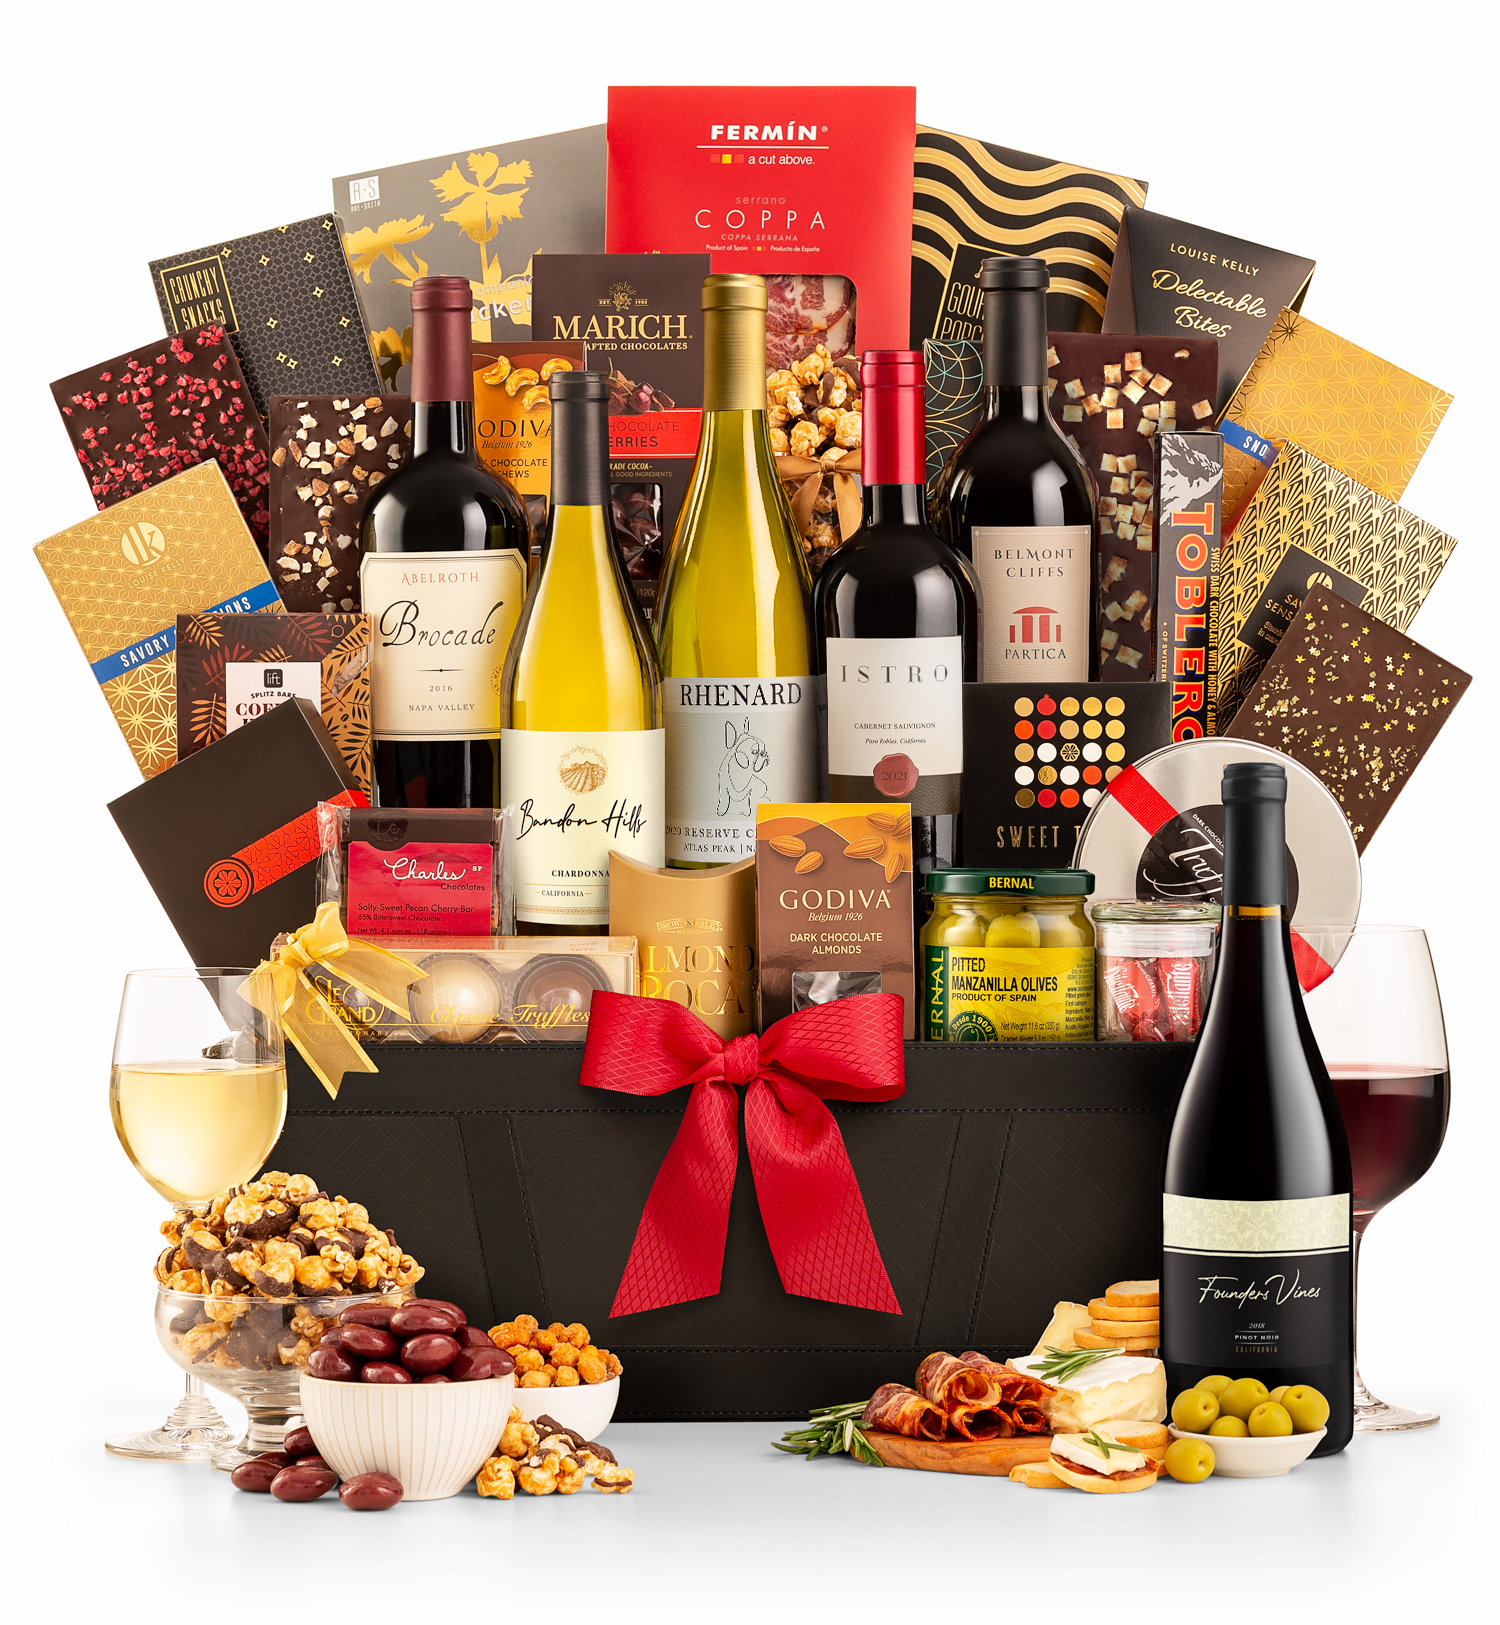 The Red Carpet Wine Gift Basket